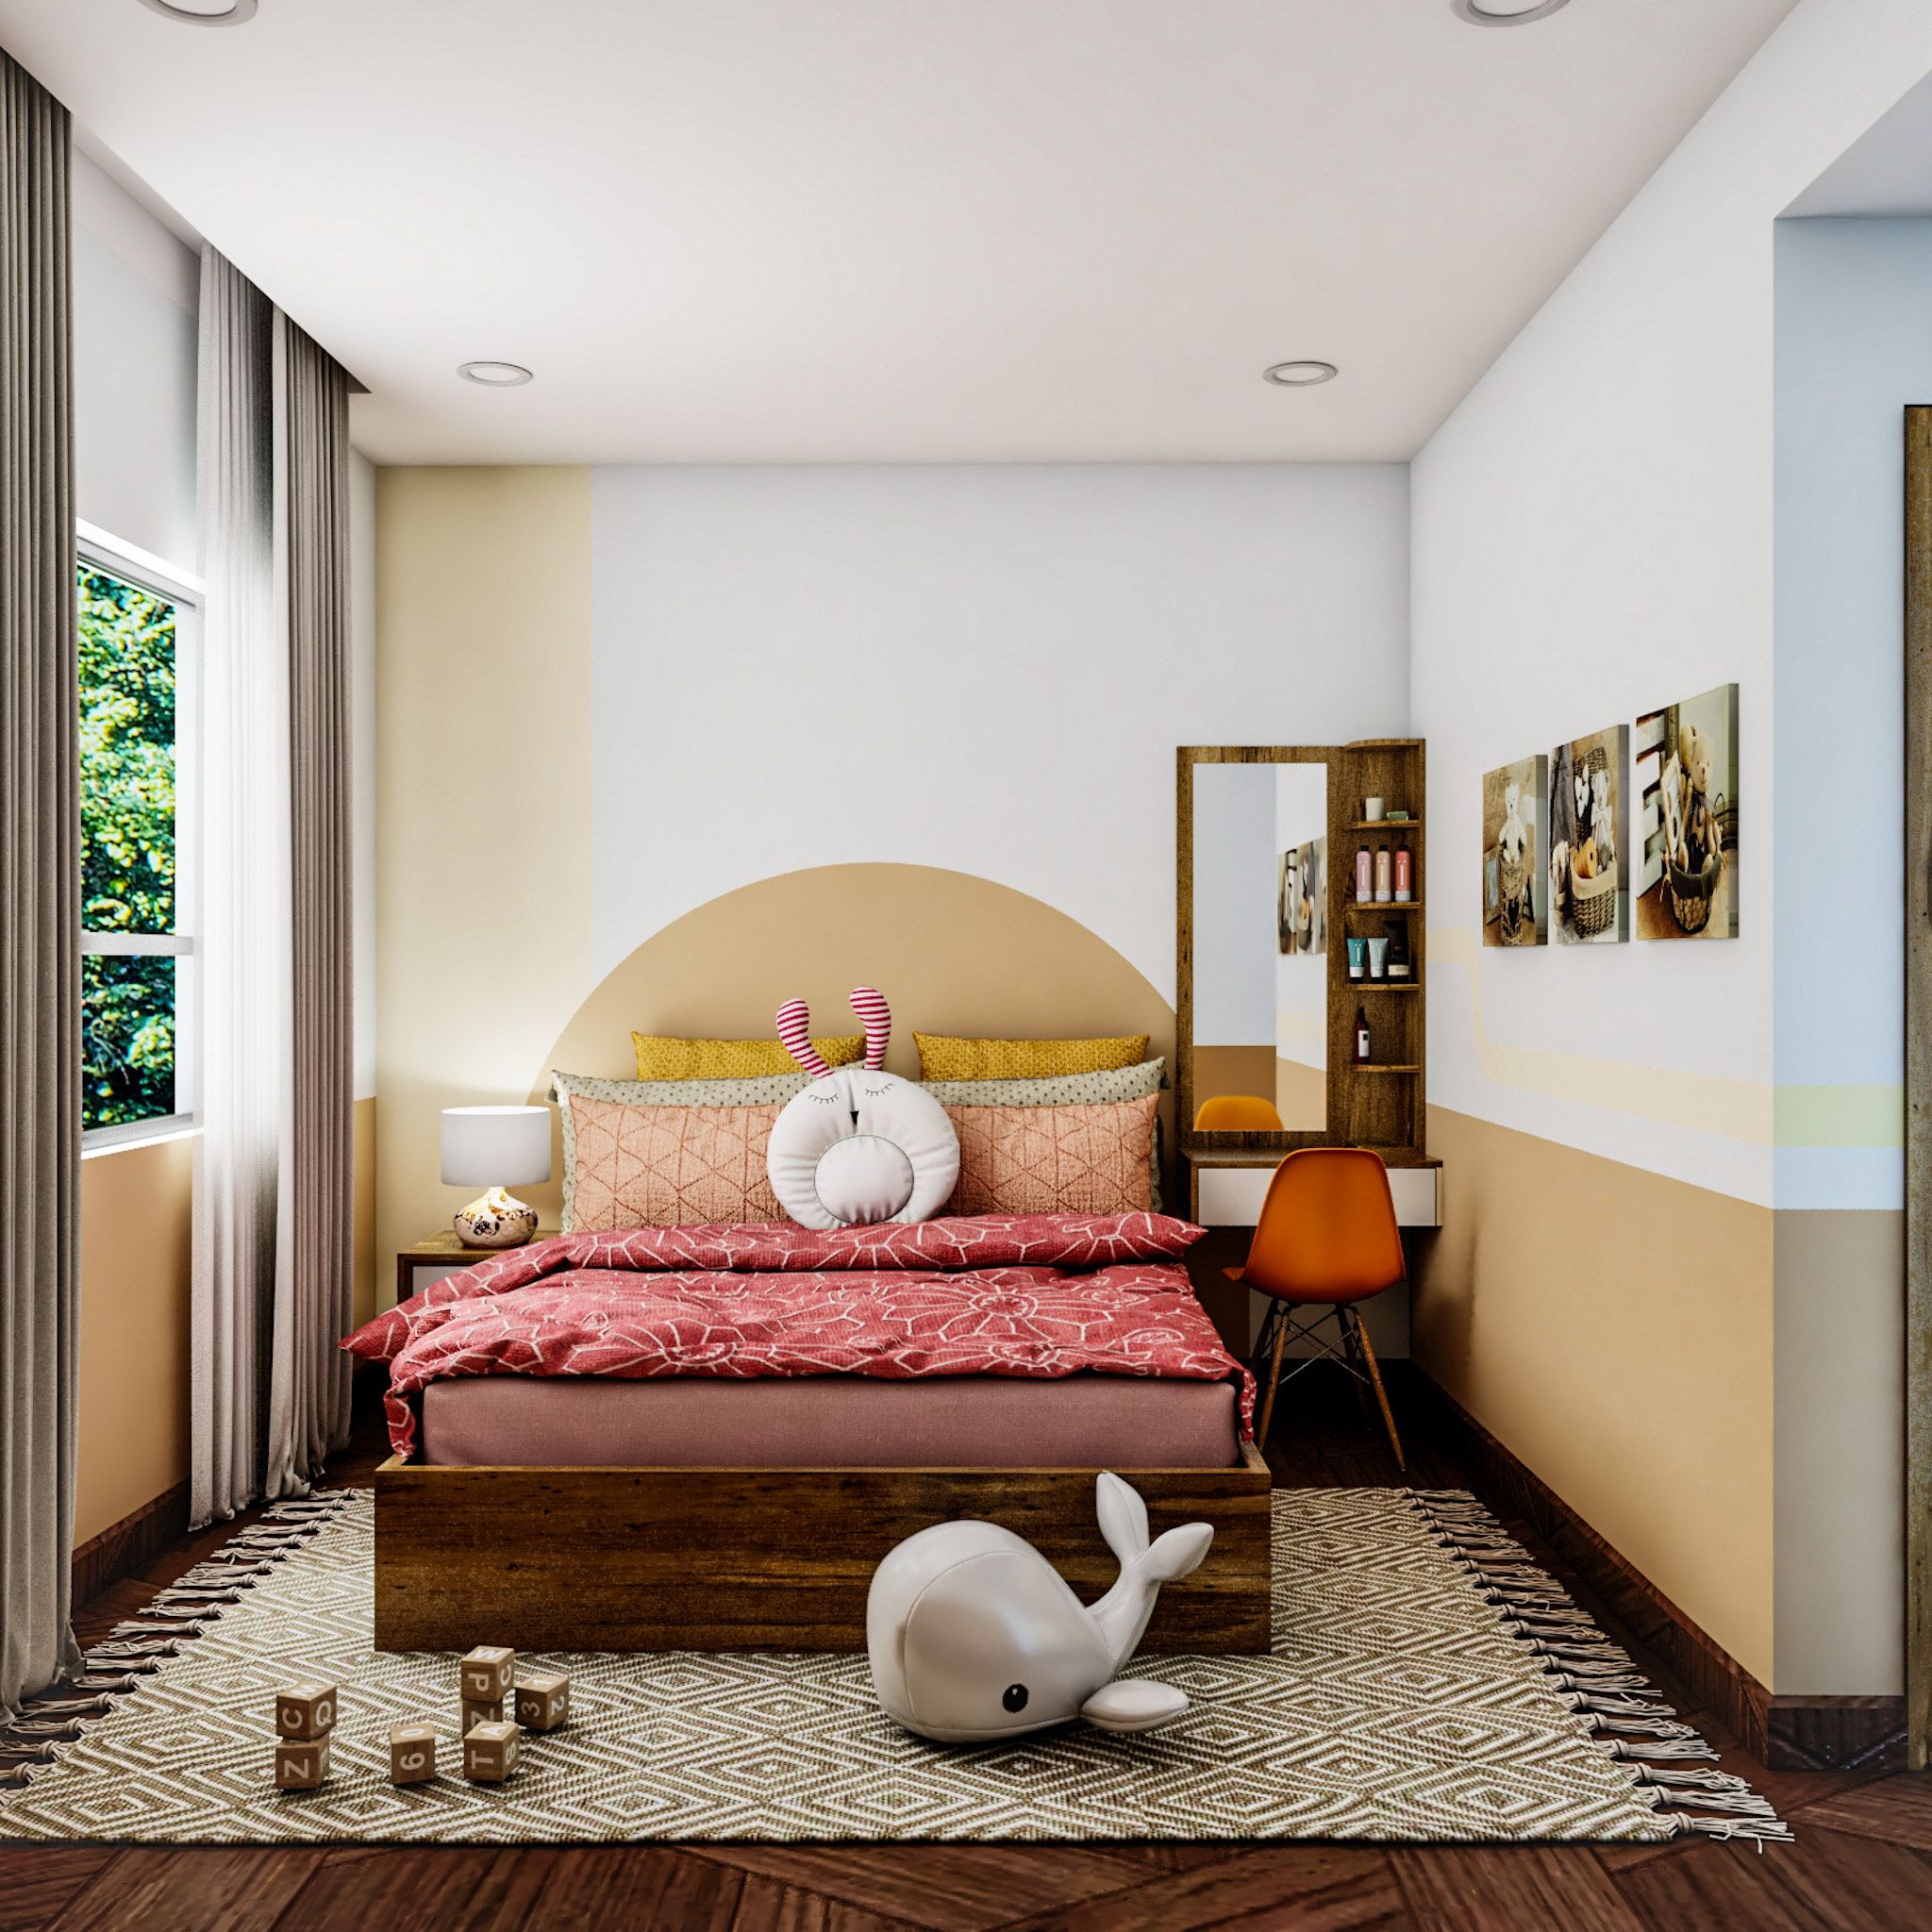 Contemporary Kids Room With A Wooden Double Bed And Dual-Tone Wall Design